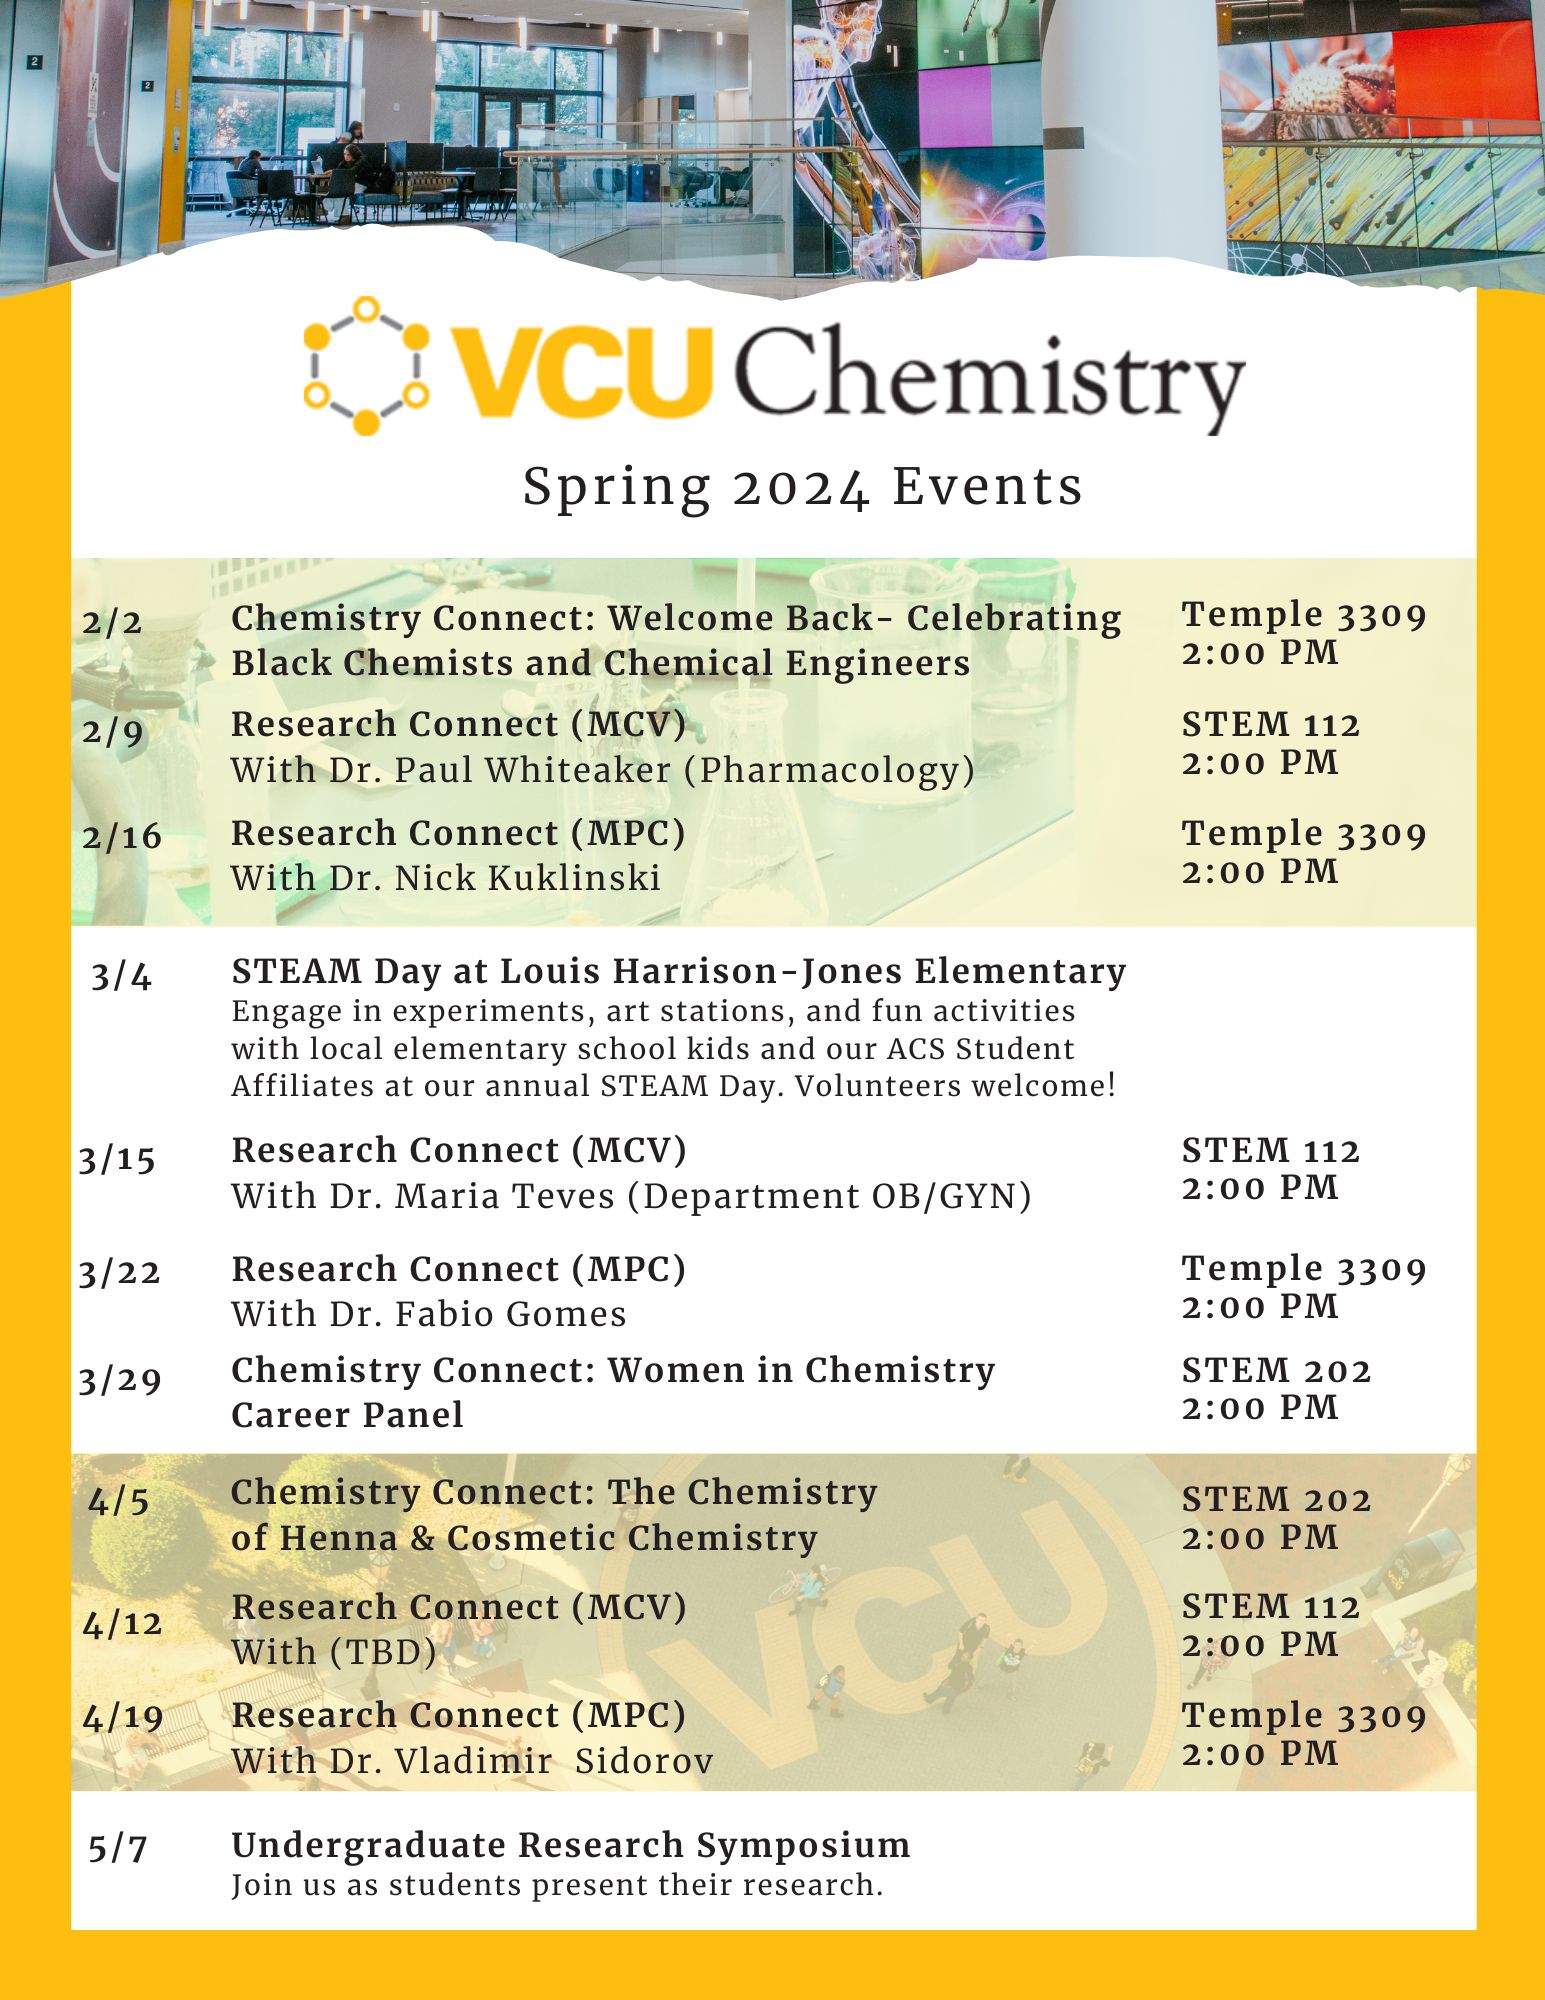 A flier filled with events for the spring 2024 semester